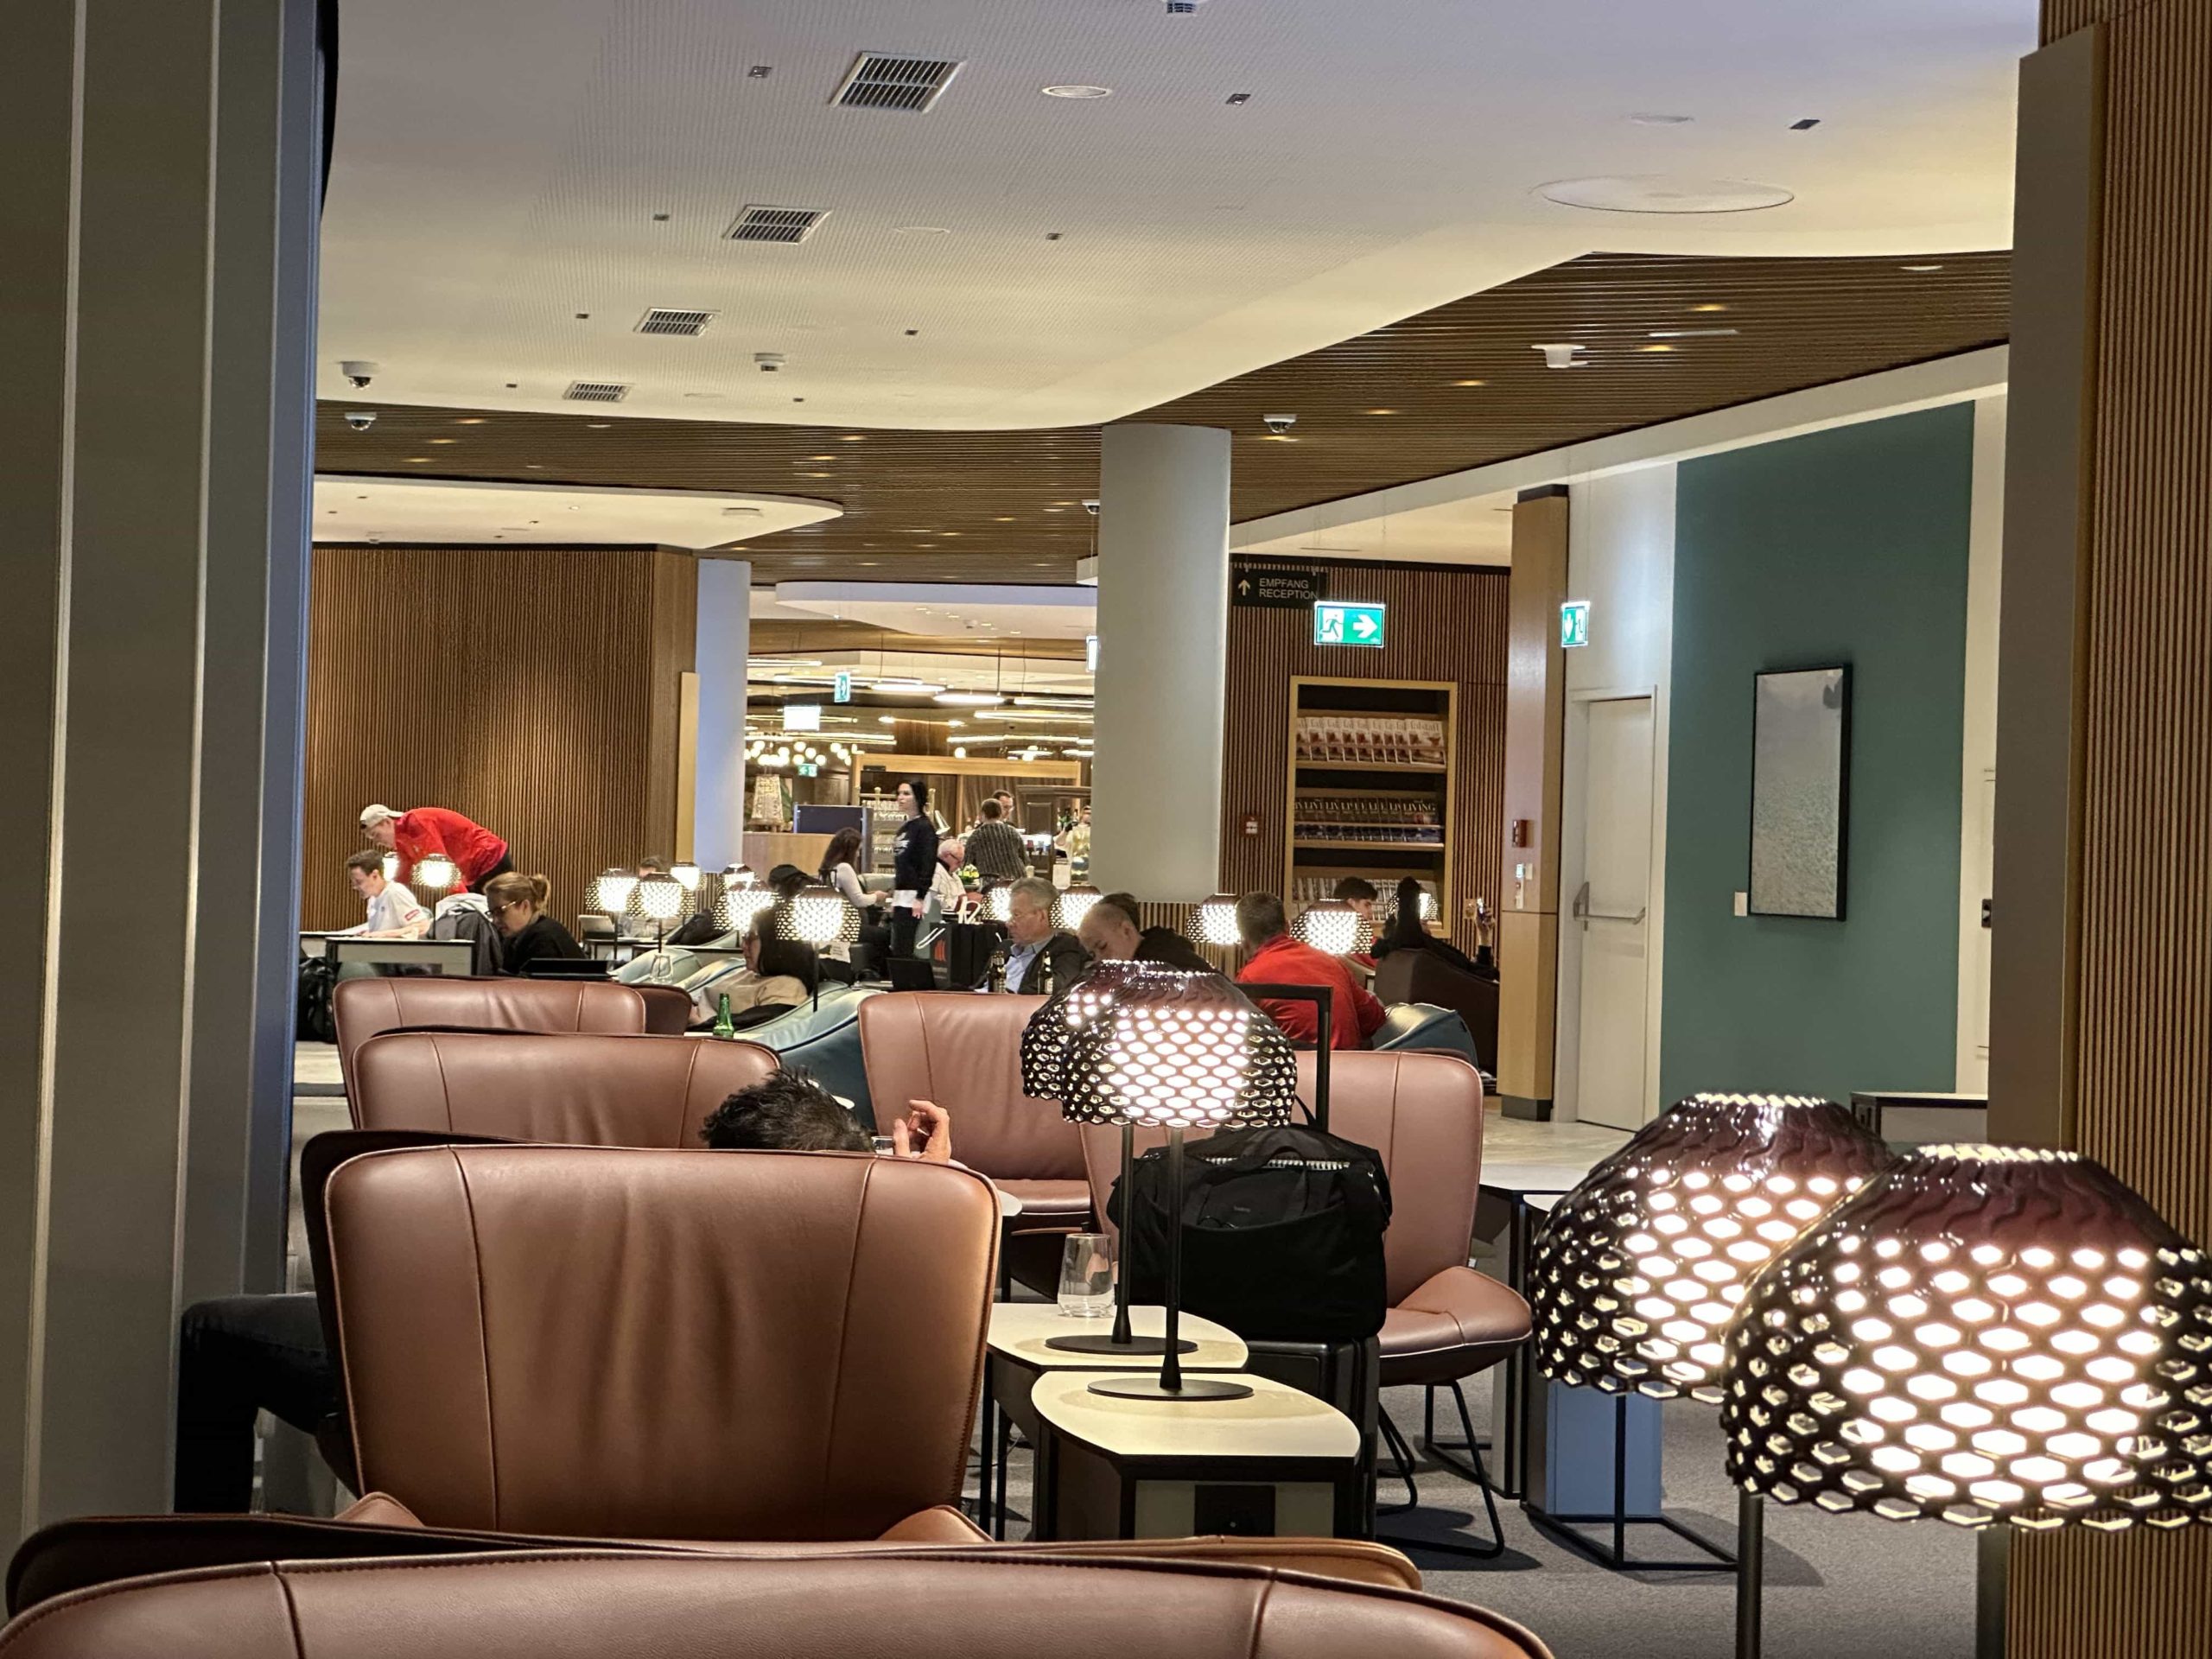 Comfortable leather lounge seating within an off-shoot of an airport lounge